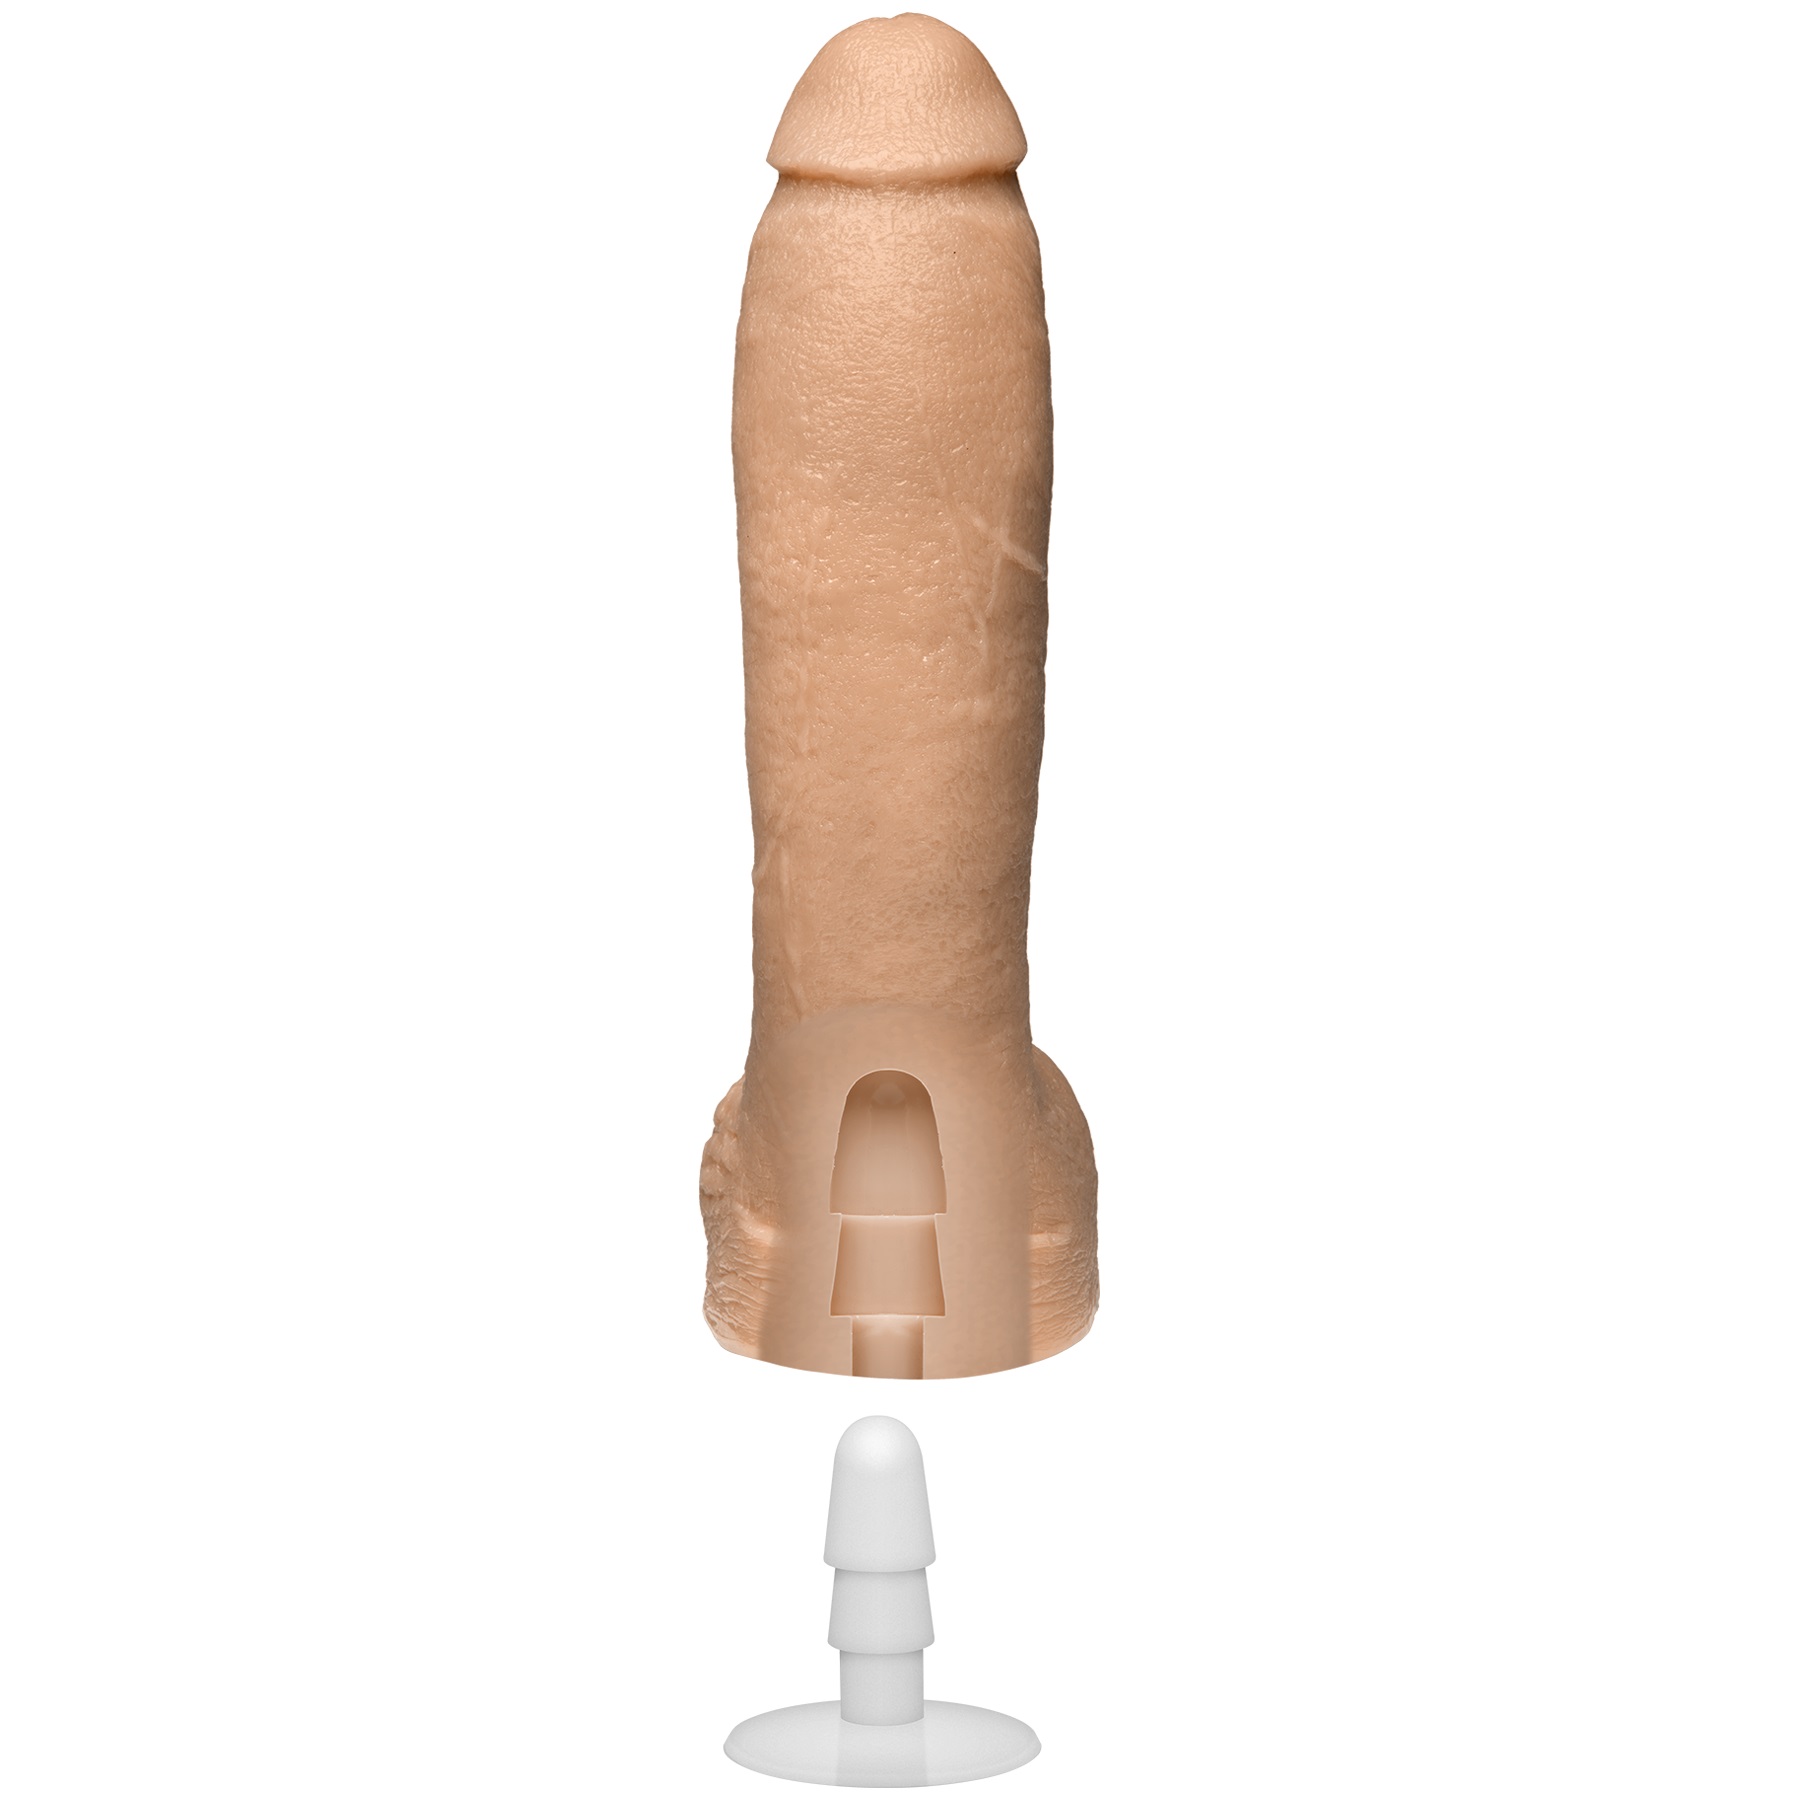 Jeff Stryker Realistic Cock With Removable Vac-U-Lock Suction Cup